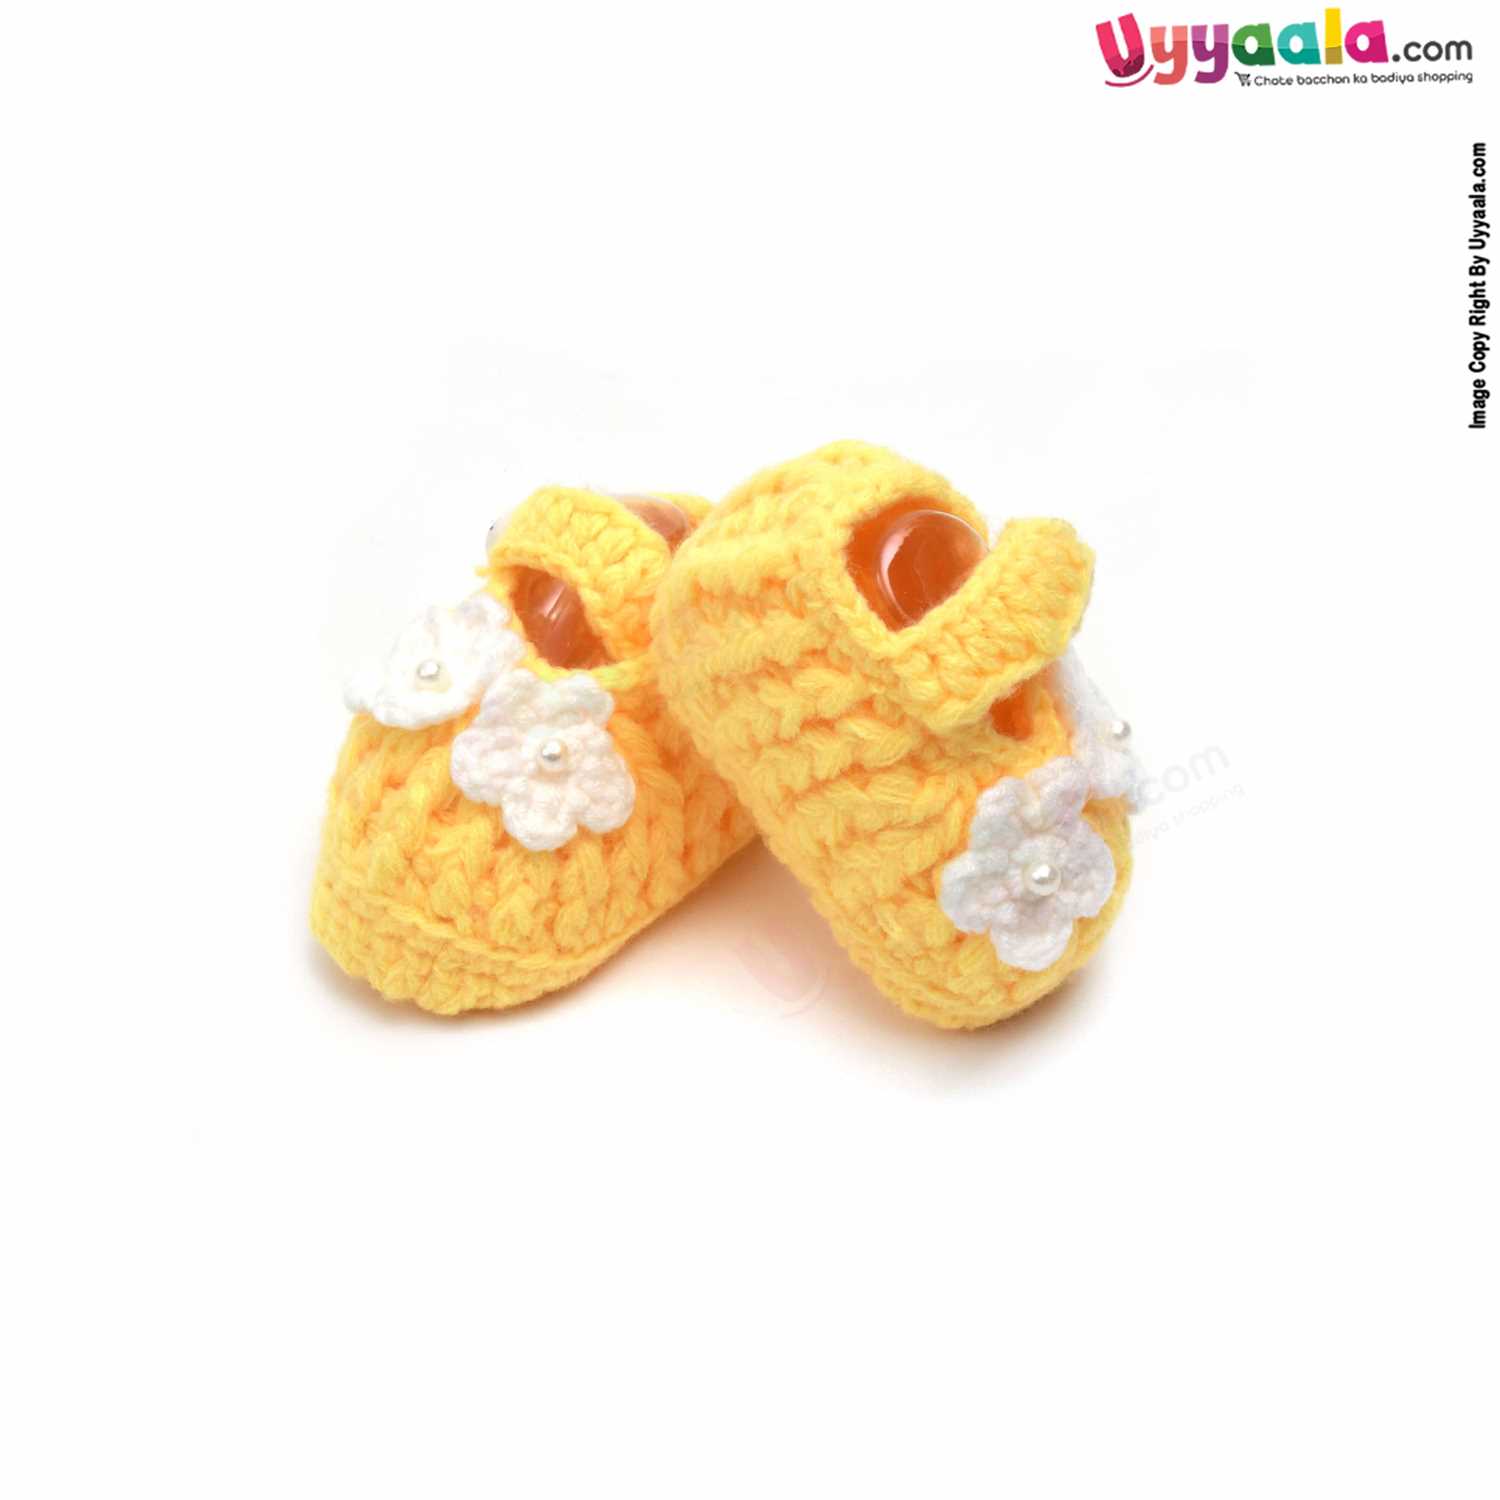 Woolen Hand Knitted Socks for New Born 0-6m Age - Yellow